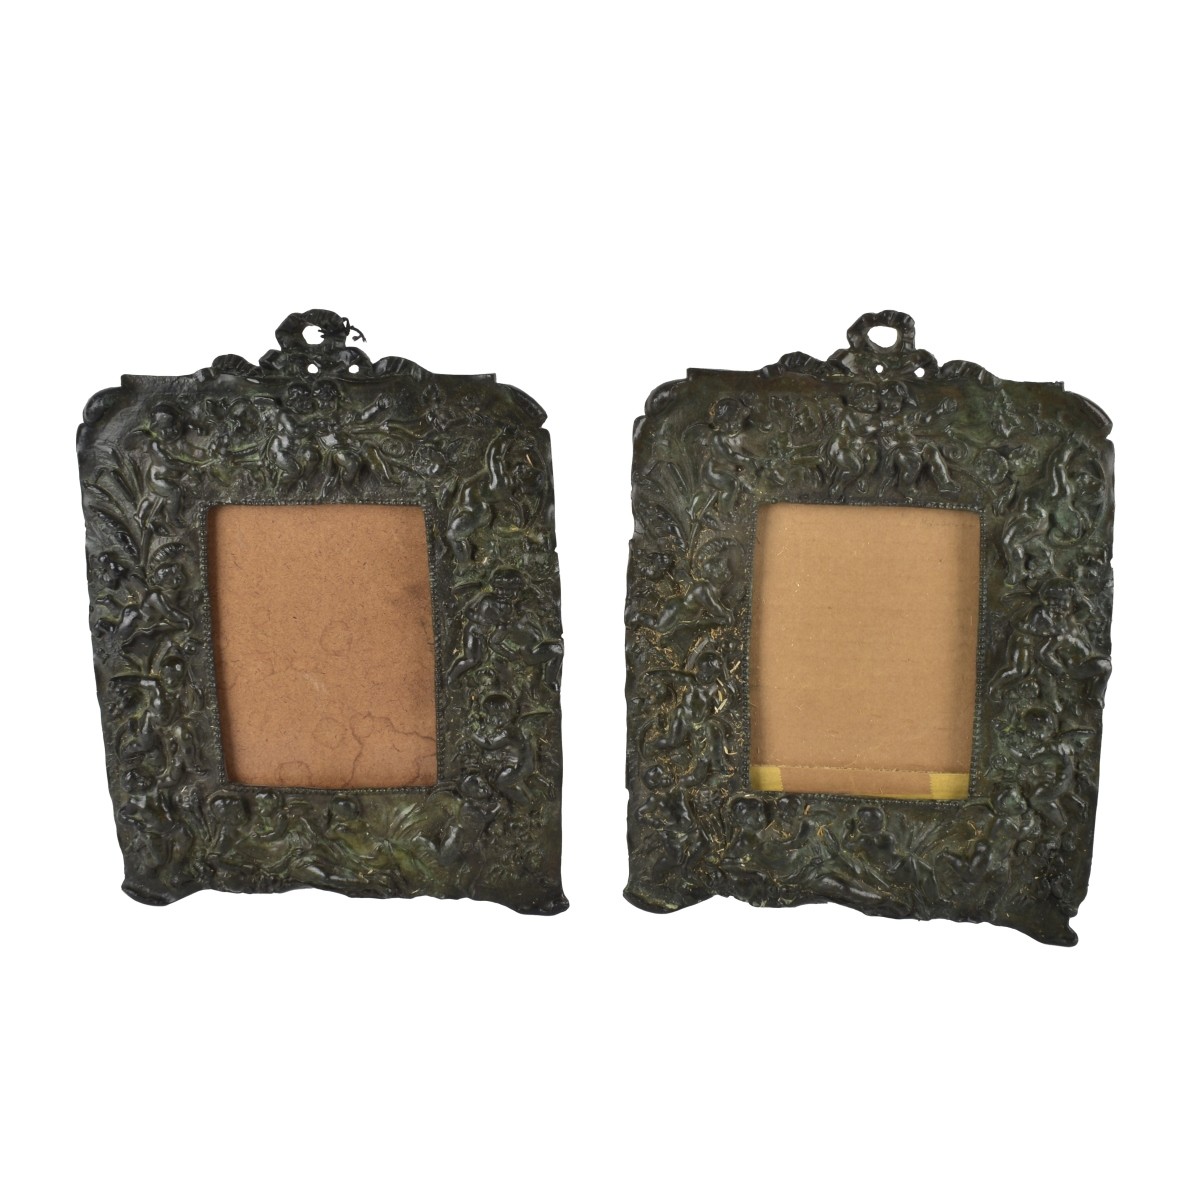 Pair of Neoclassical Style Picture Frames